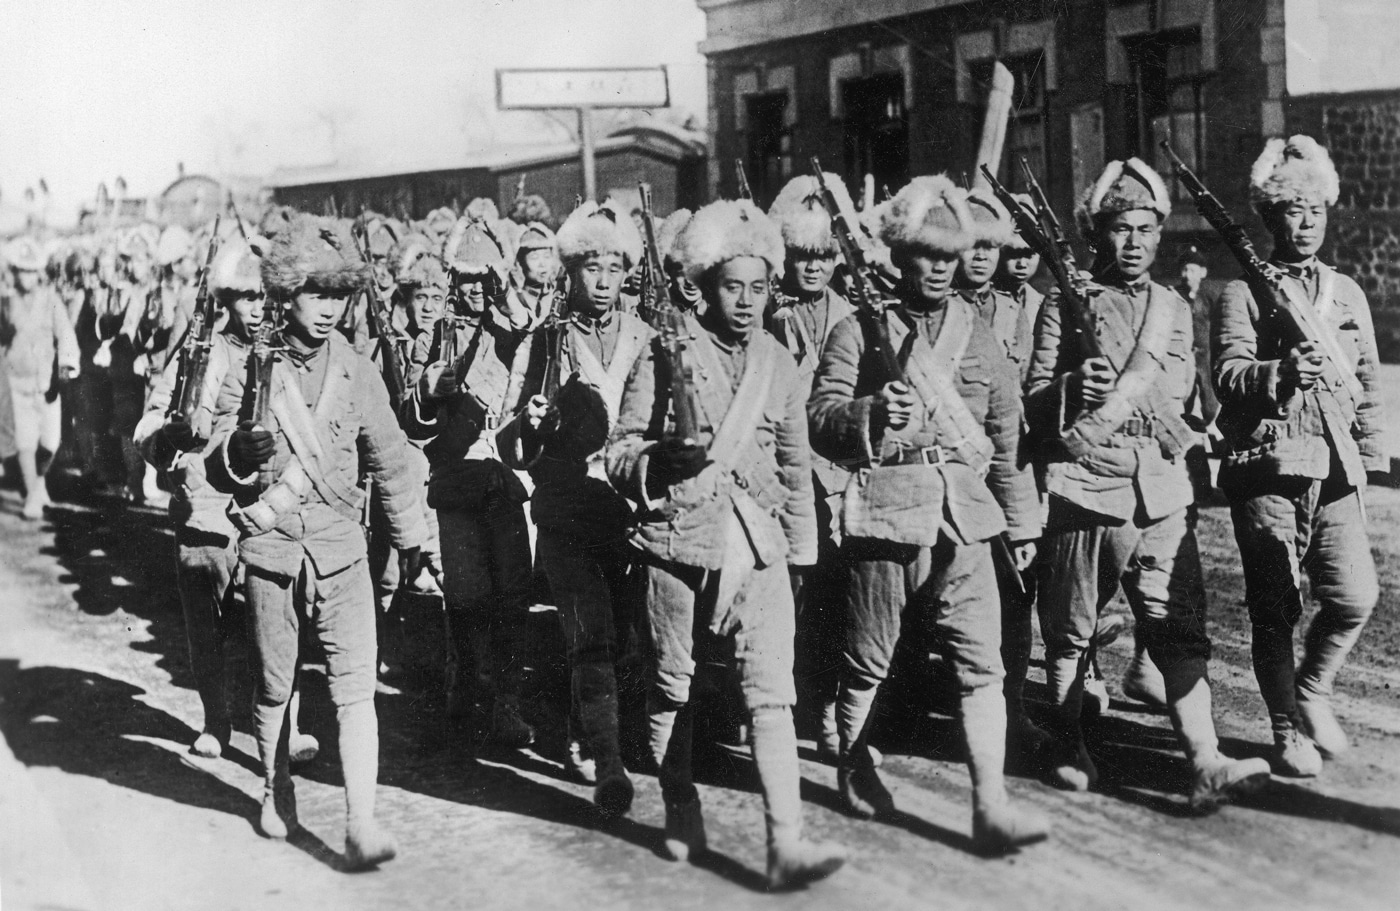 Chinese troops with Mosin-Nagant rifles march to meet Japanese invaders at Jinzhou